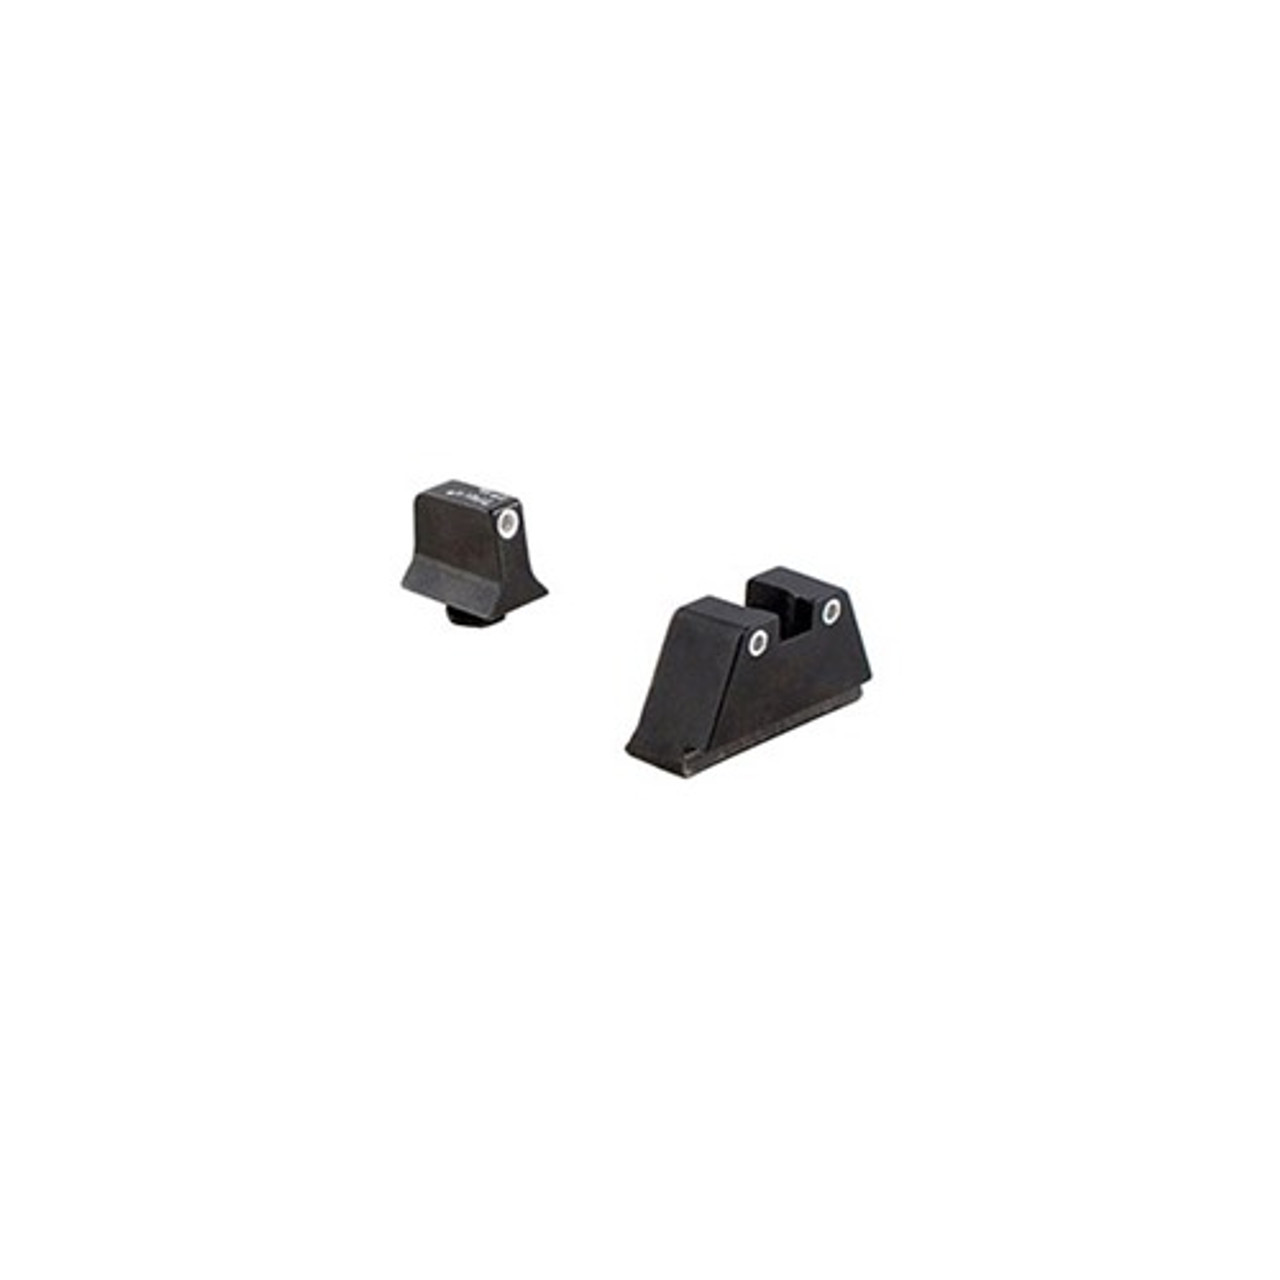 Trijicon - 600649 - Night Sight Set White Outline- Green Lamps